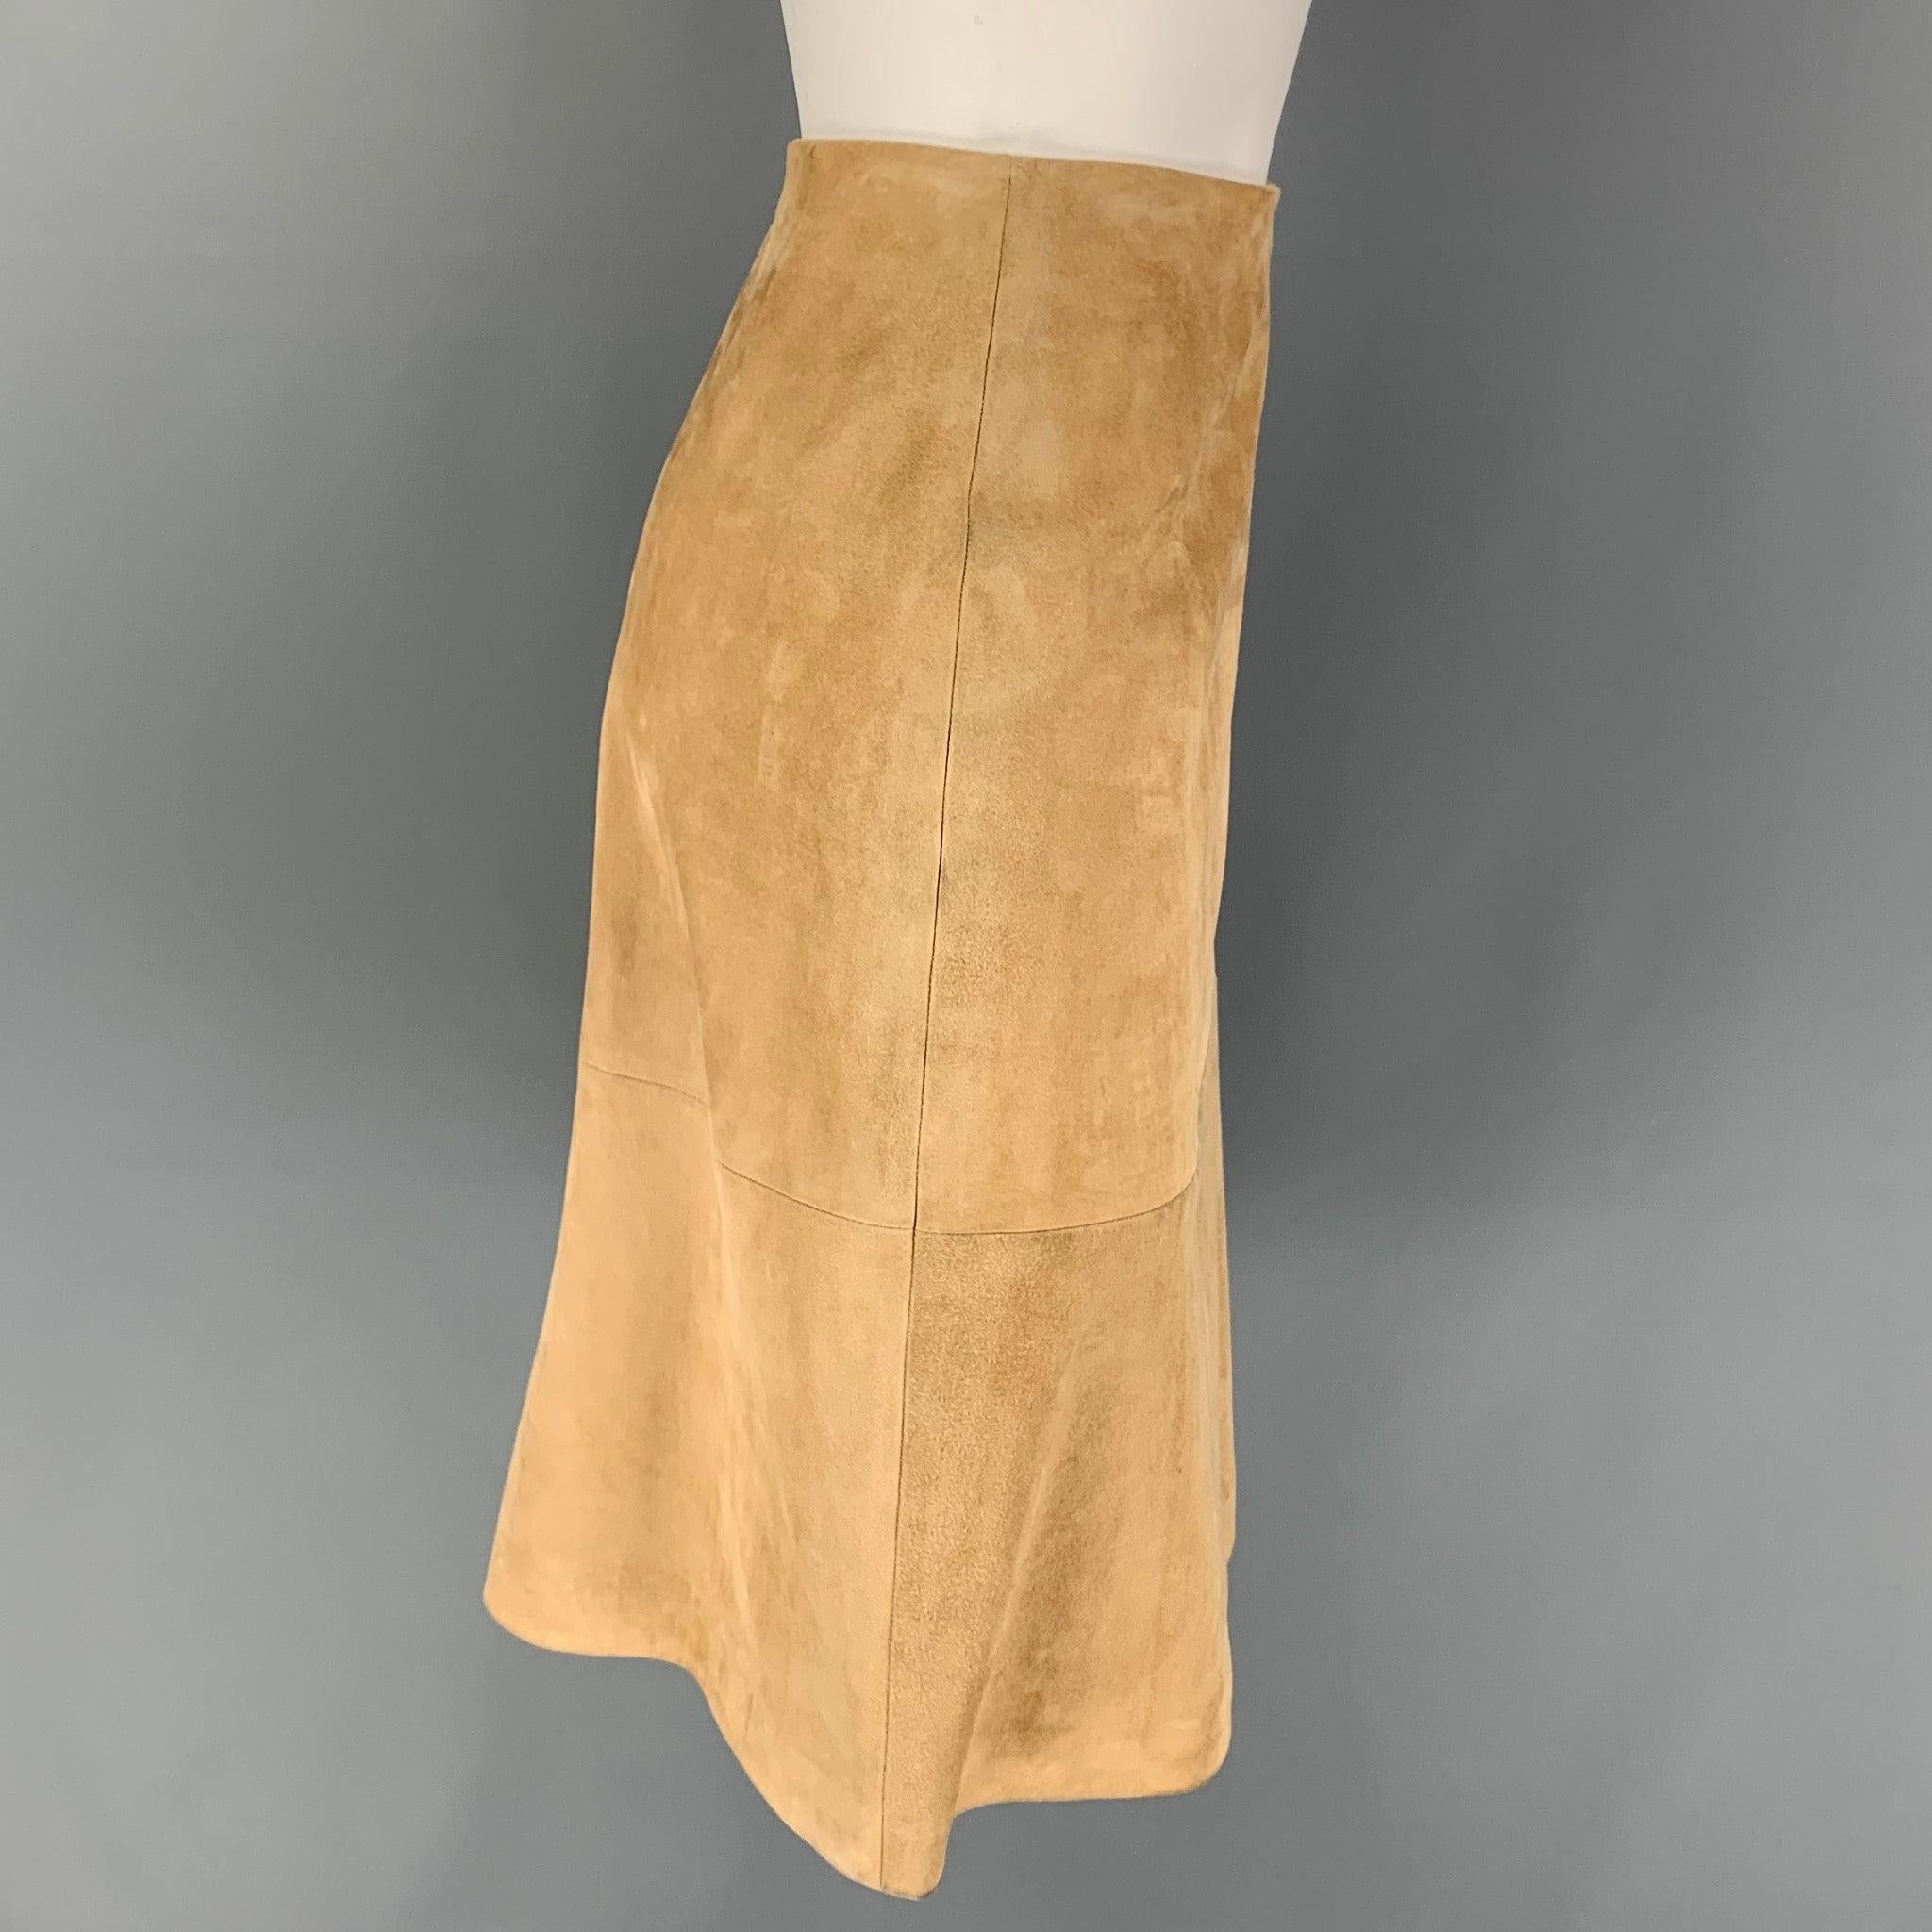 MICHAEL KORS skirt comes in a beige suede with a silk liner featuring 
pencil style and a side zipper closure. Made in Italy. Very Good
Pre-Owned Condition. 

Marked:   2 

Measurements: 
  Waist: 26 inches  Hip: 34 inches  Length: 24.5 inches 
  
 